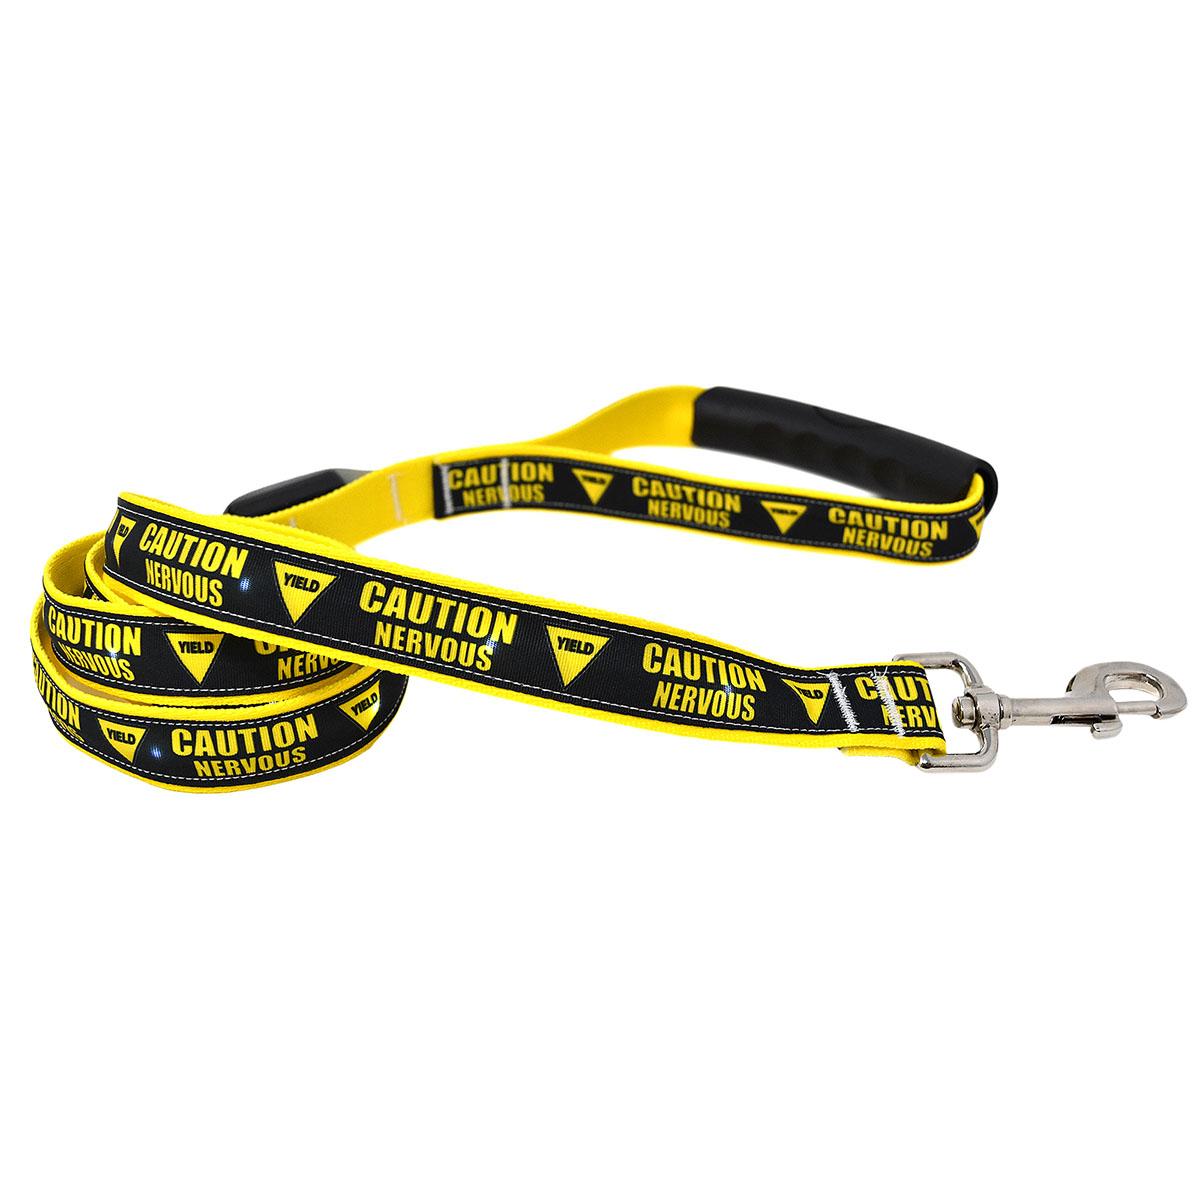 Caution Nervous Yield Sign ORION LED Dog Leash by Yellow Dog